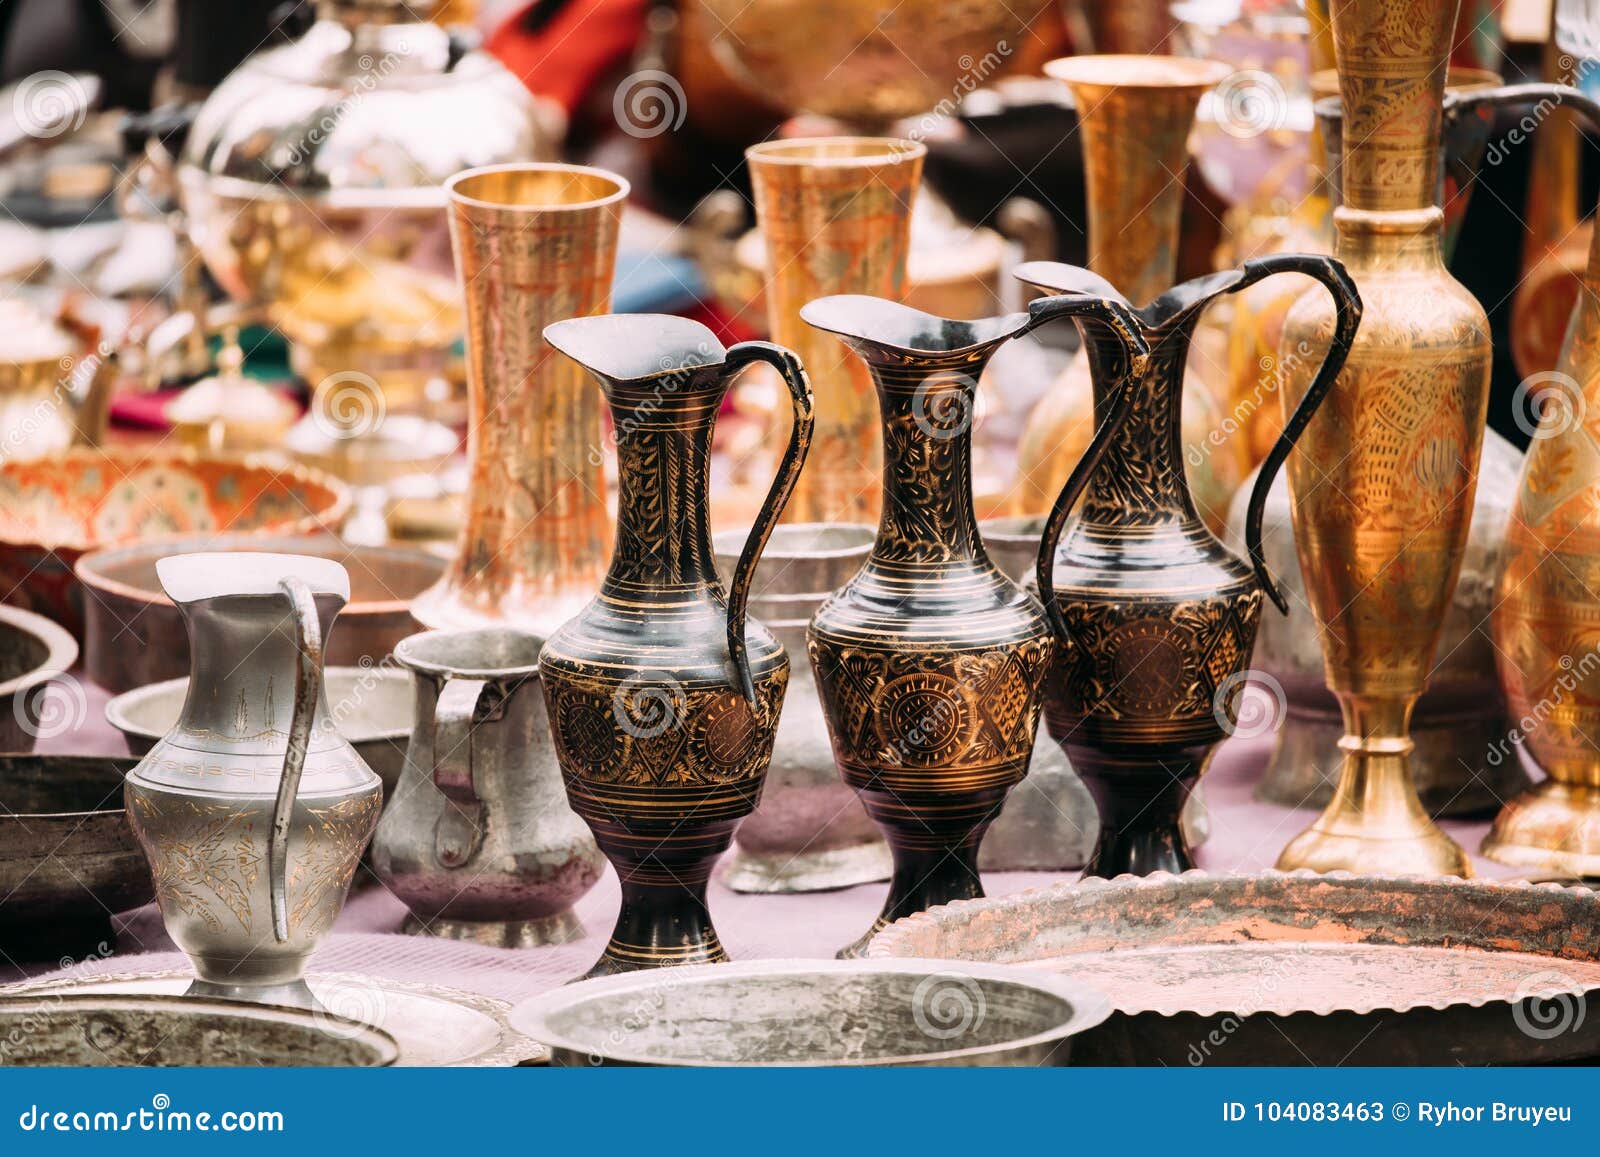 tbilisi, georgia. close view of jugs in shop flea market of antiques old retro vintage things